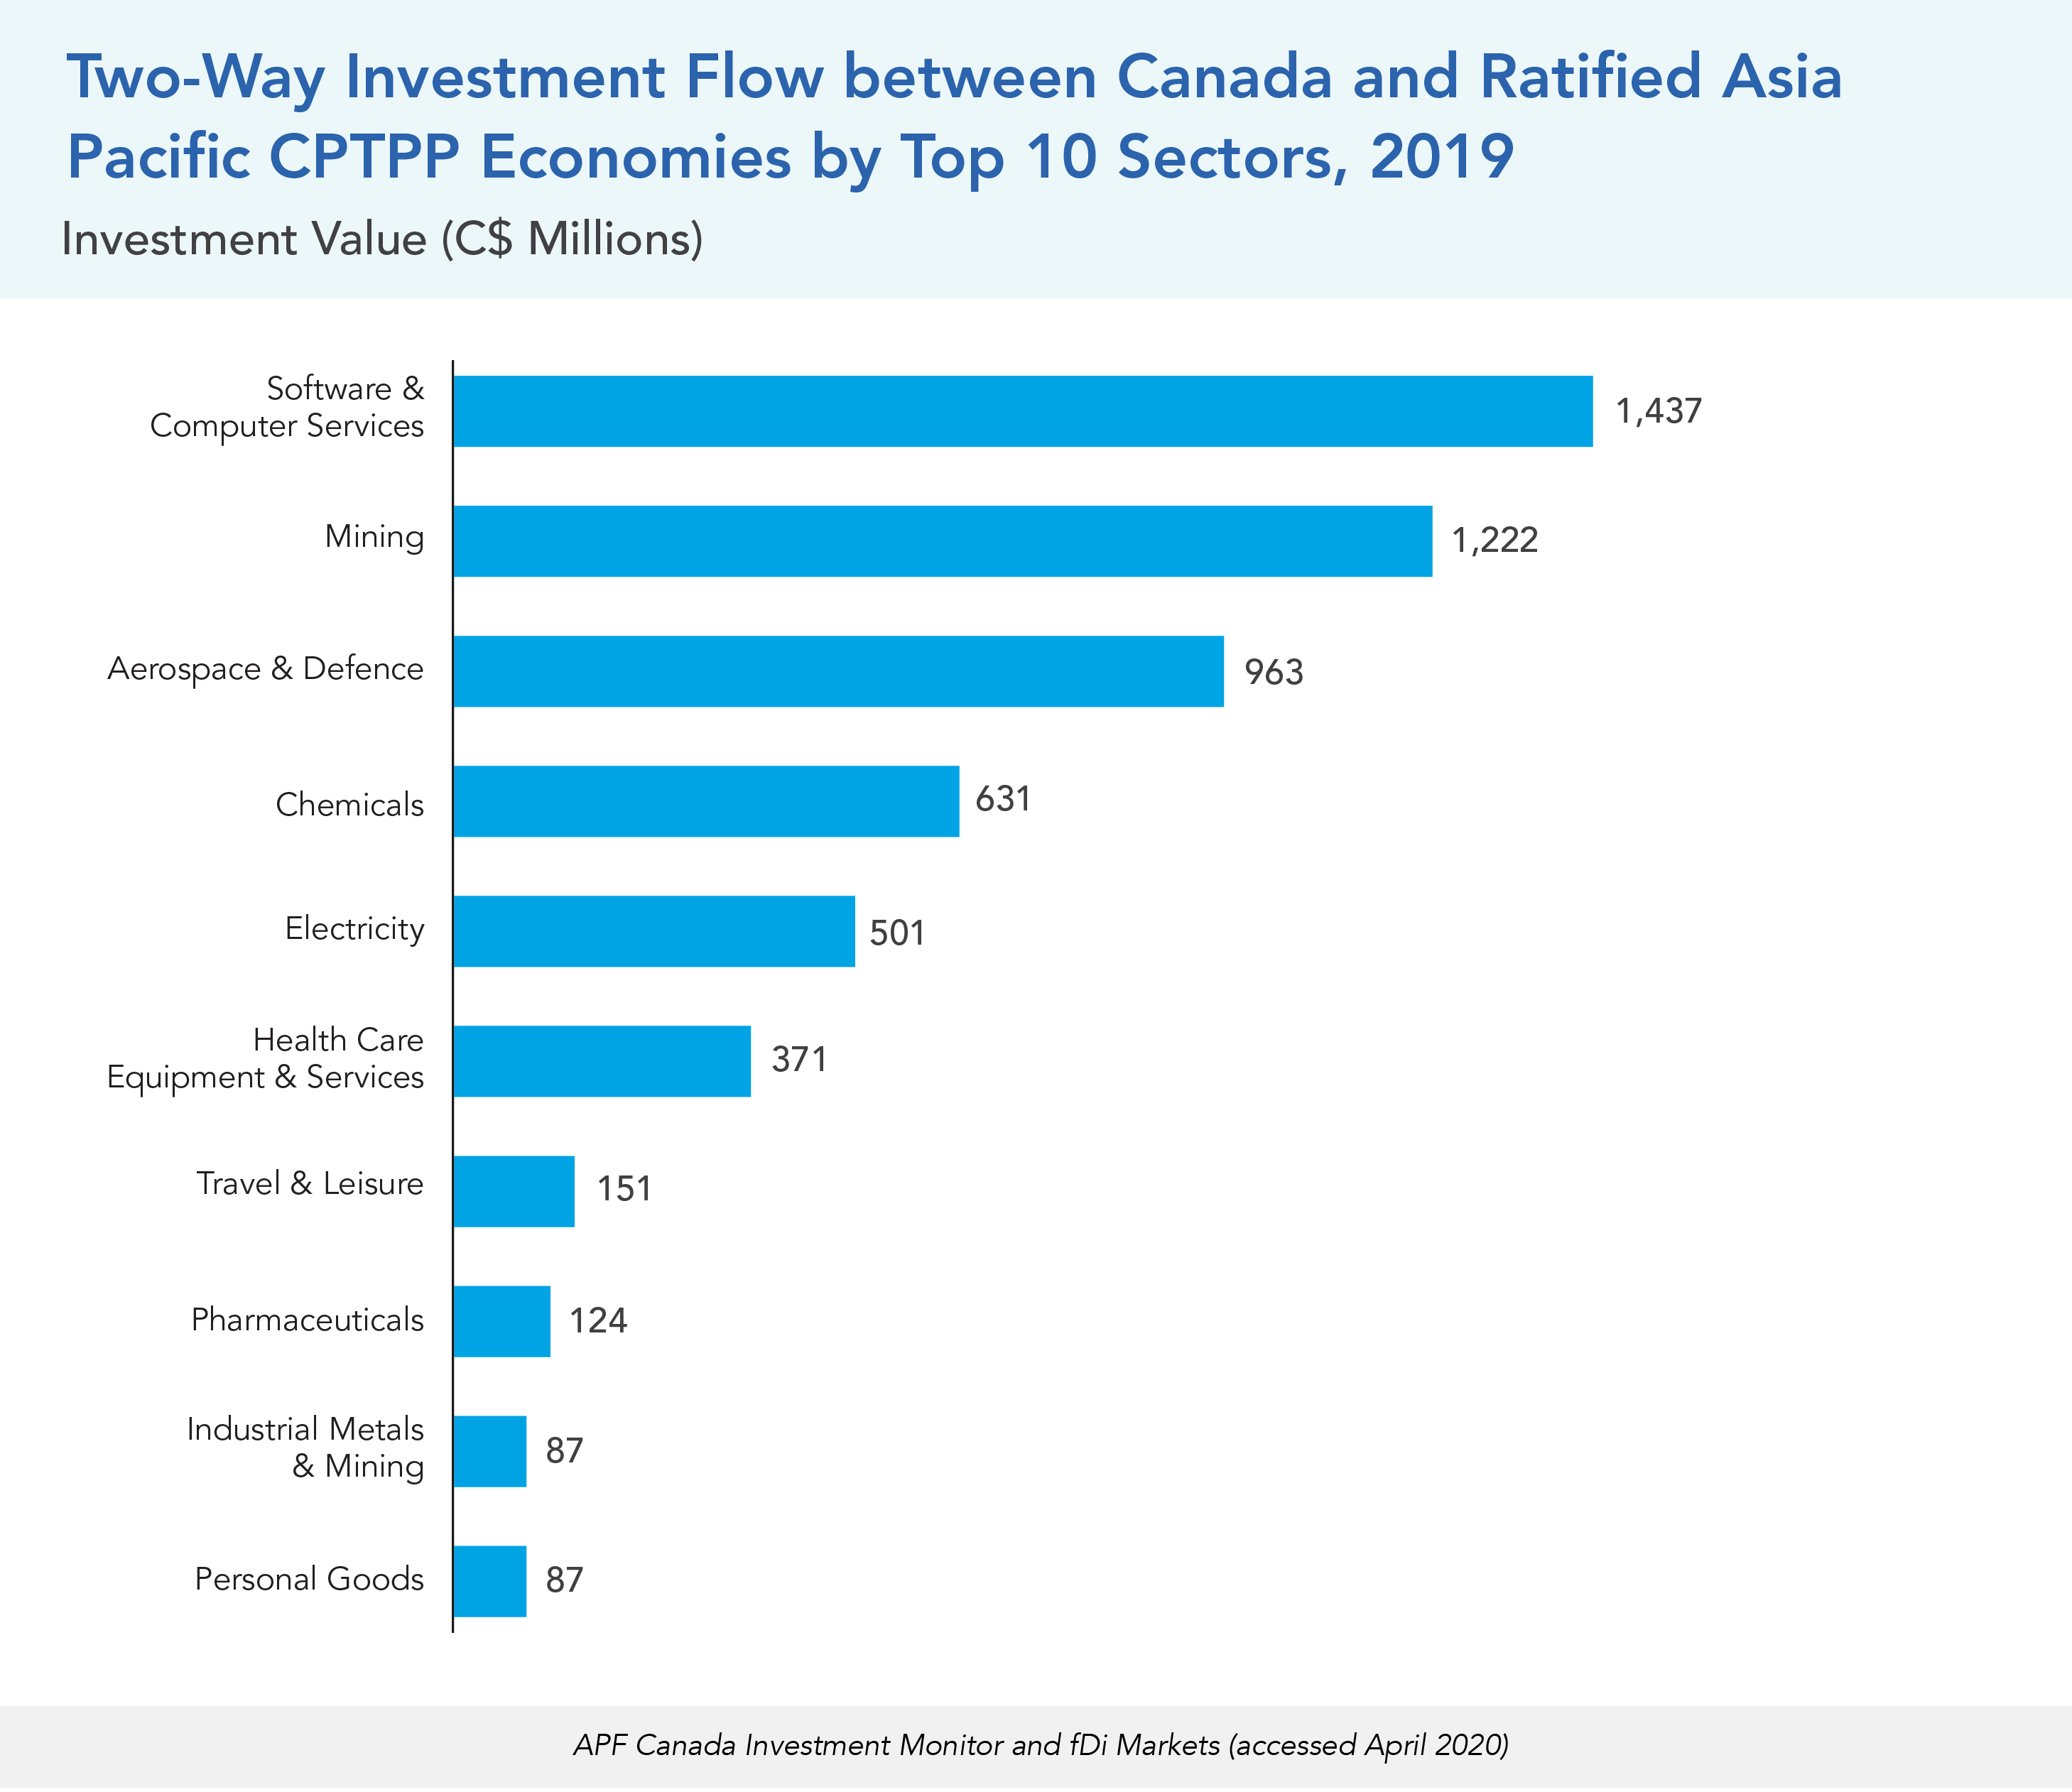 Two-Way Investment Flow between Canada and Ratified Asia Pacific CPTPP Economies by Top 10 Sectors, 2019